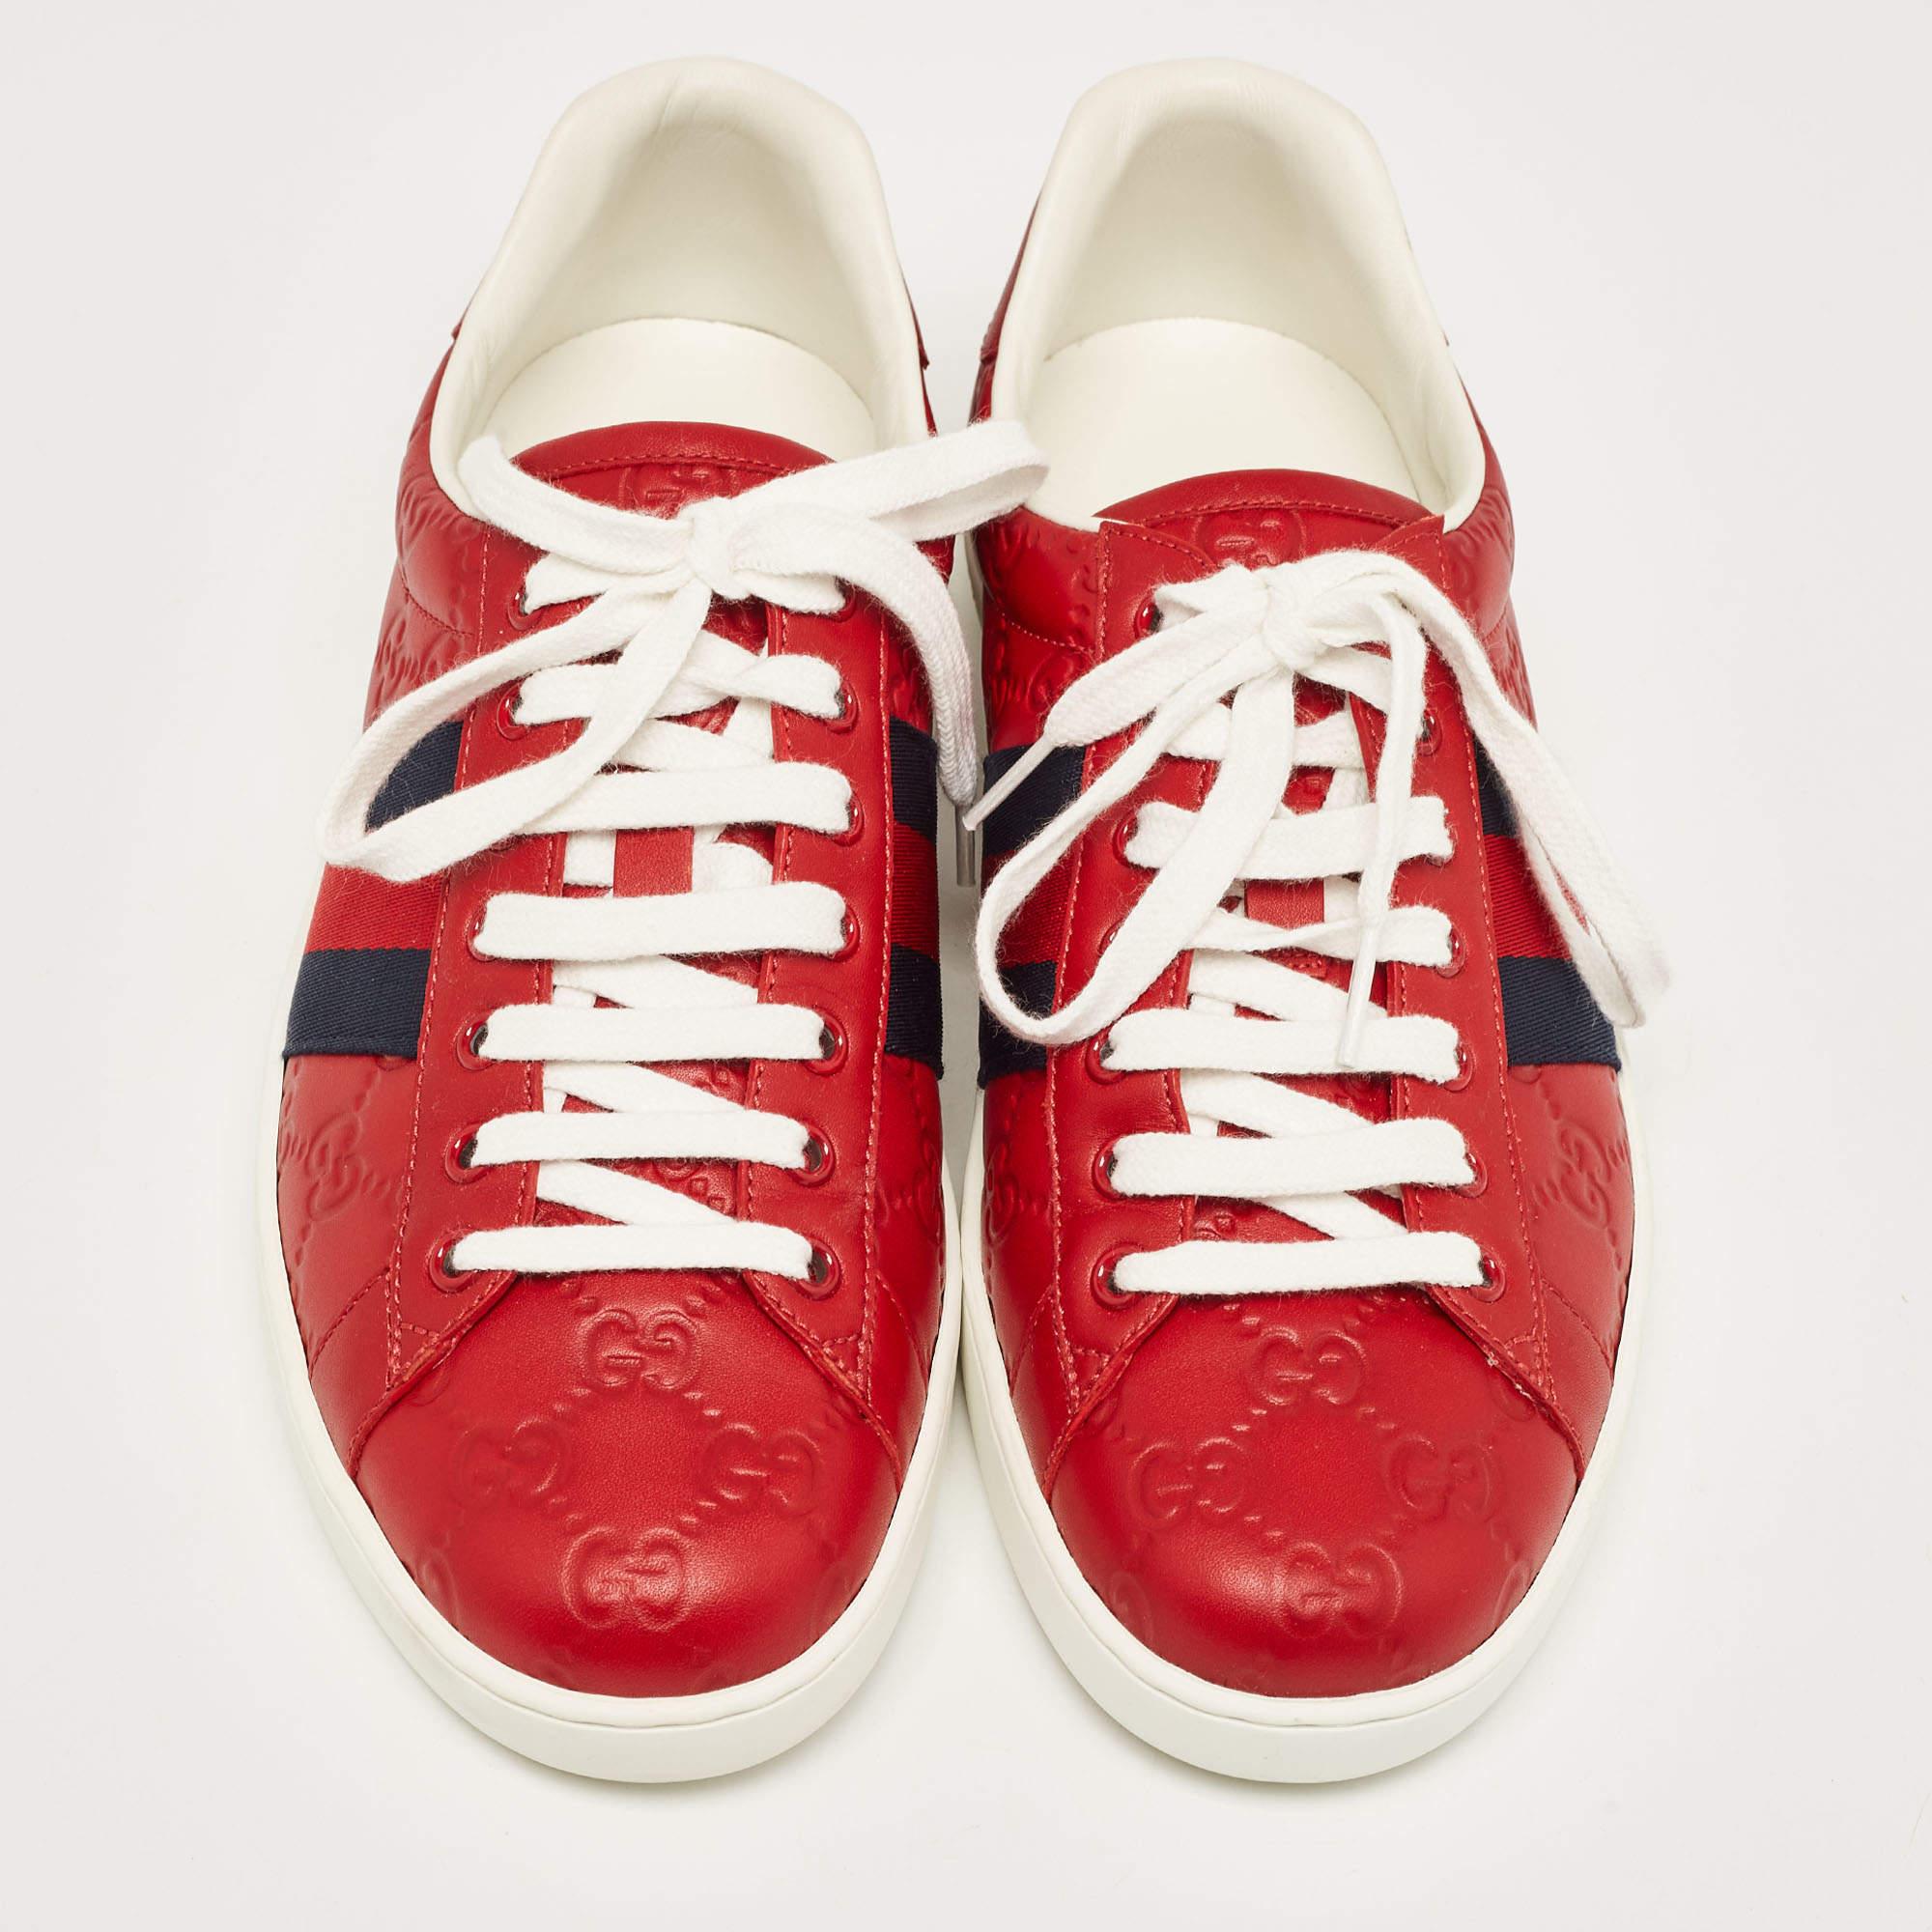 Gucci Red Guccissima Leather Ace Sneakers Size 41.5 For Sale 3